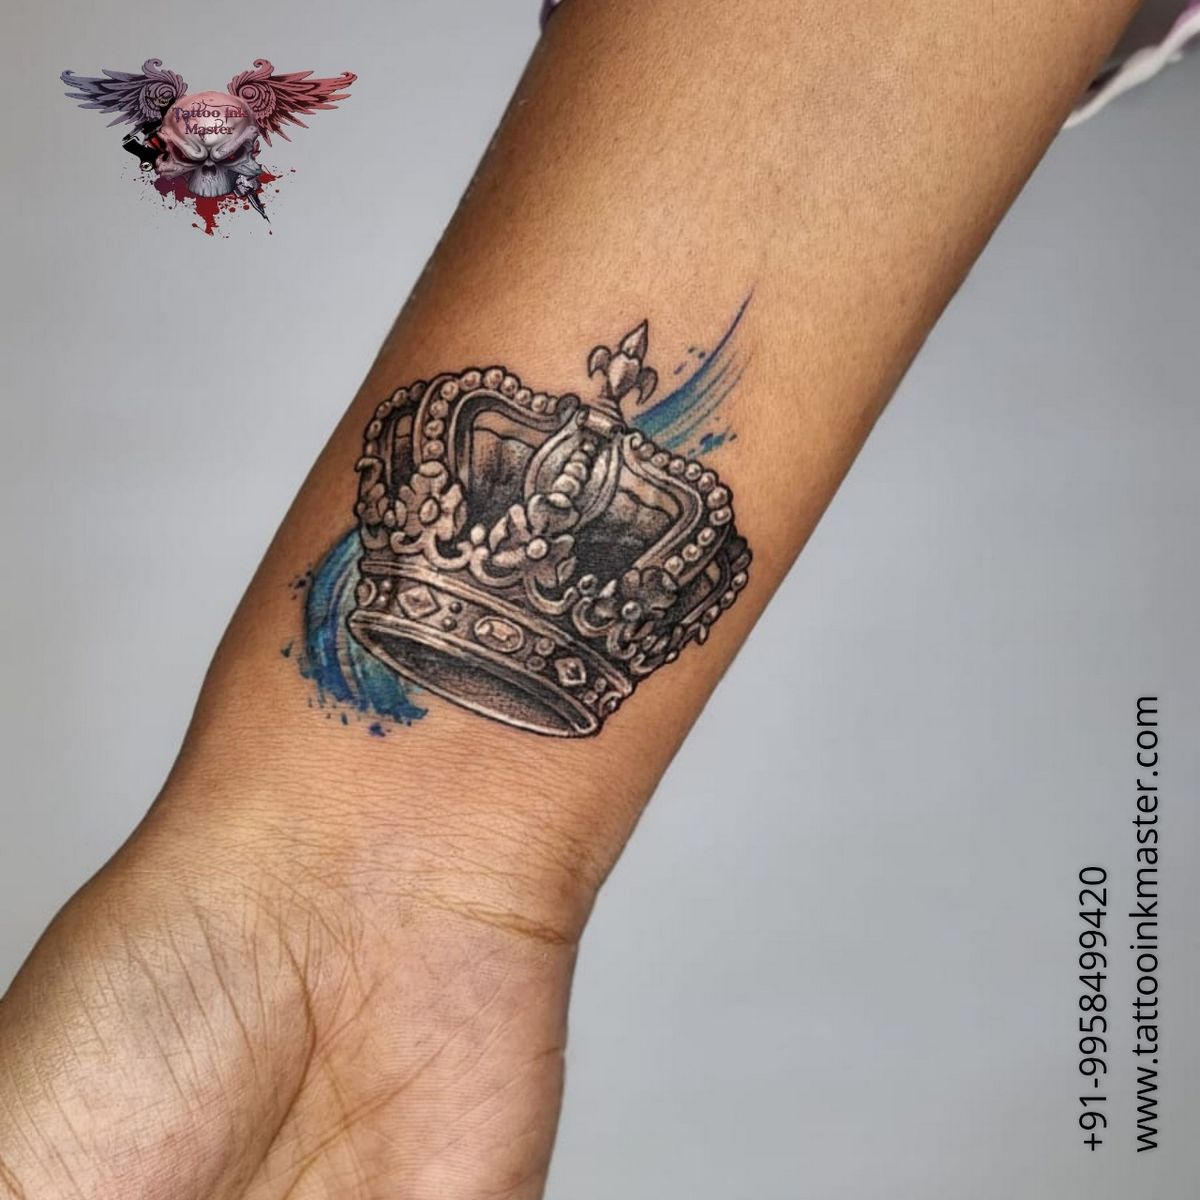 Colorful Arm Tattoo of King's Crown | Tattoo Ink Master